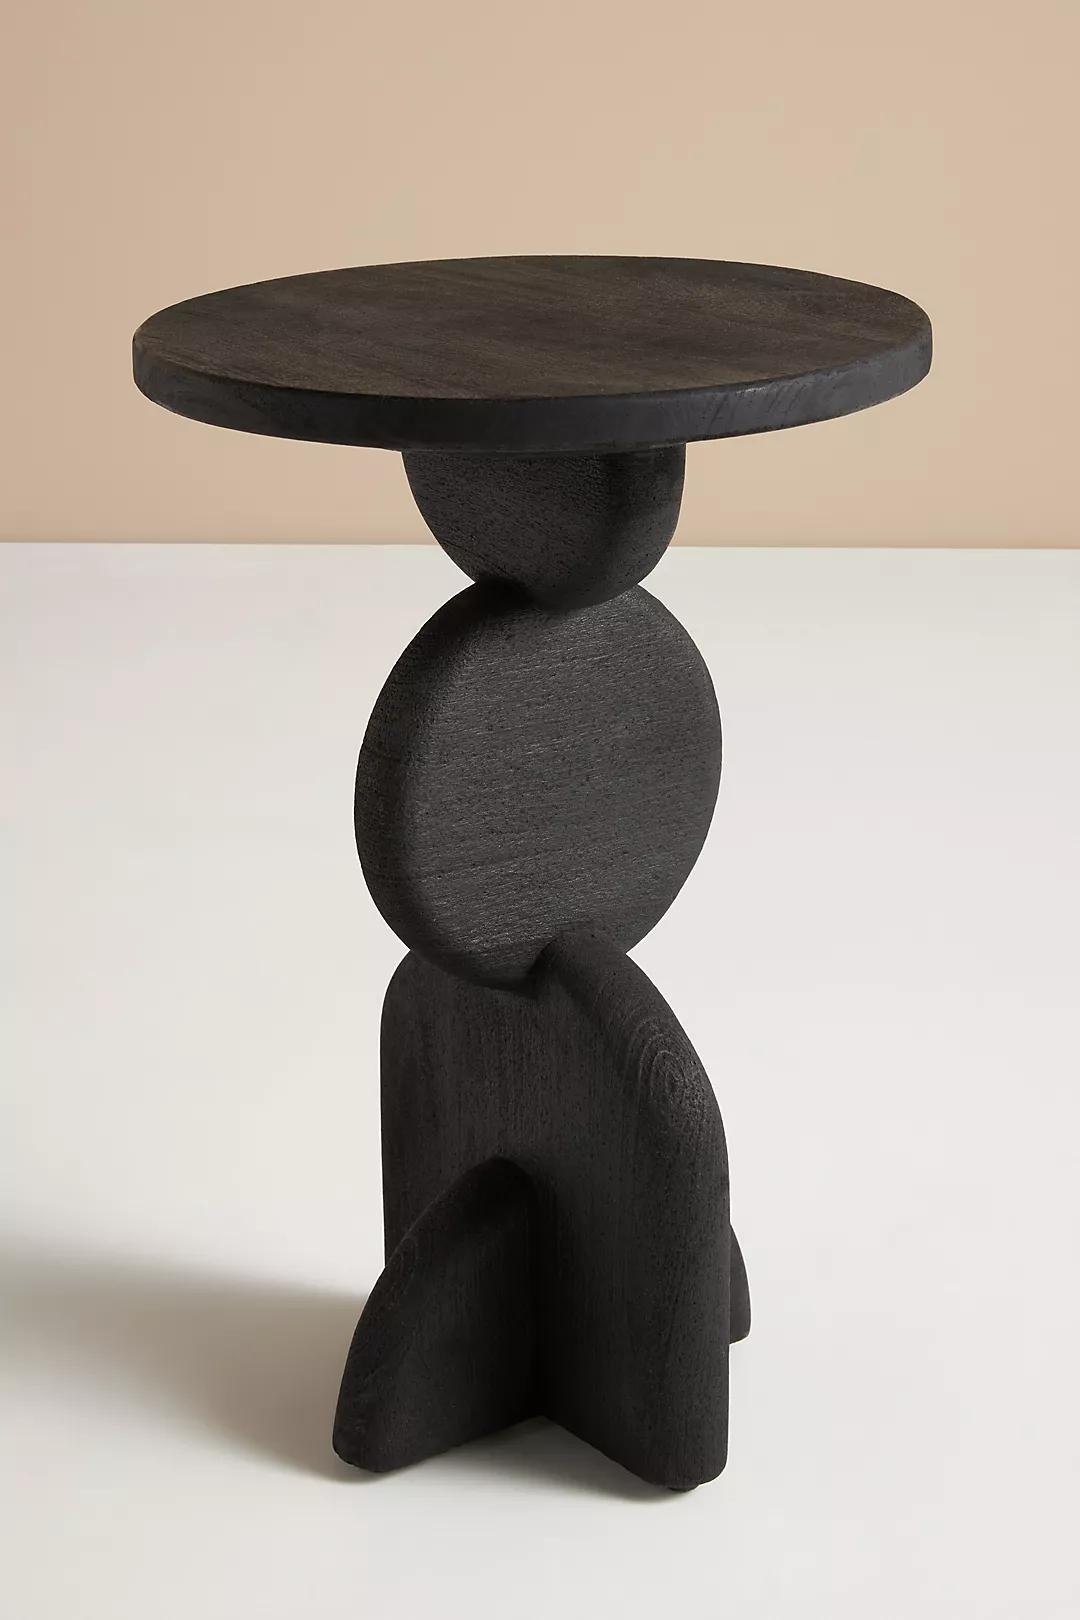 Statuette Side Table - Image 1